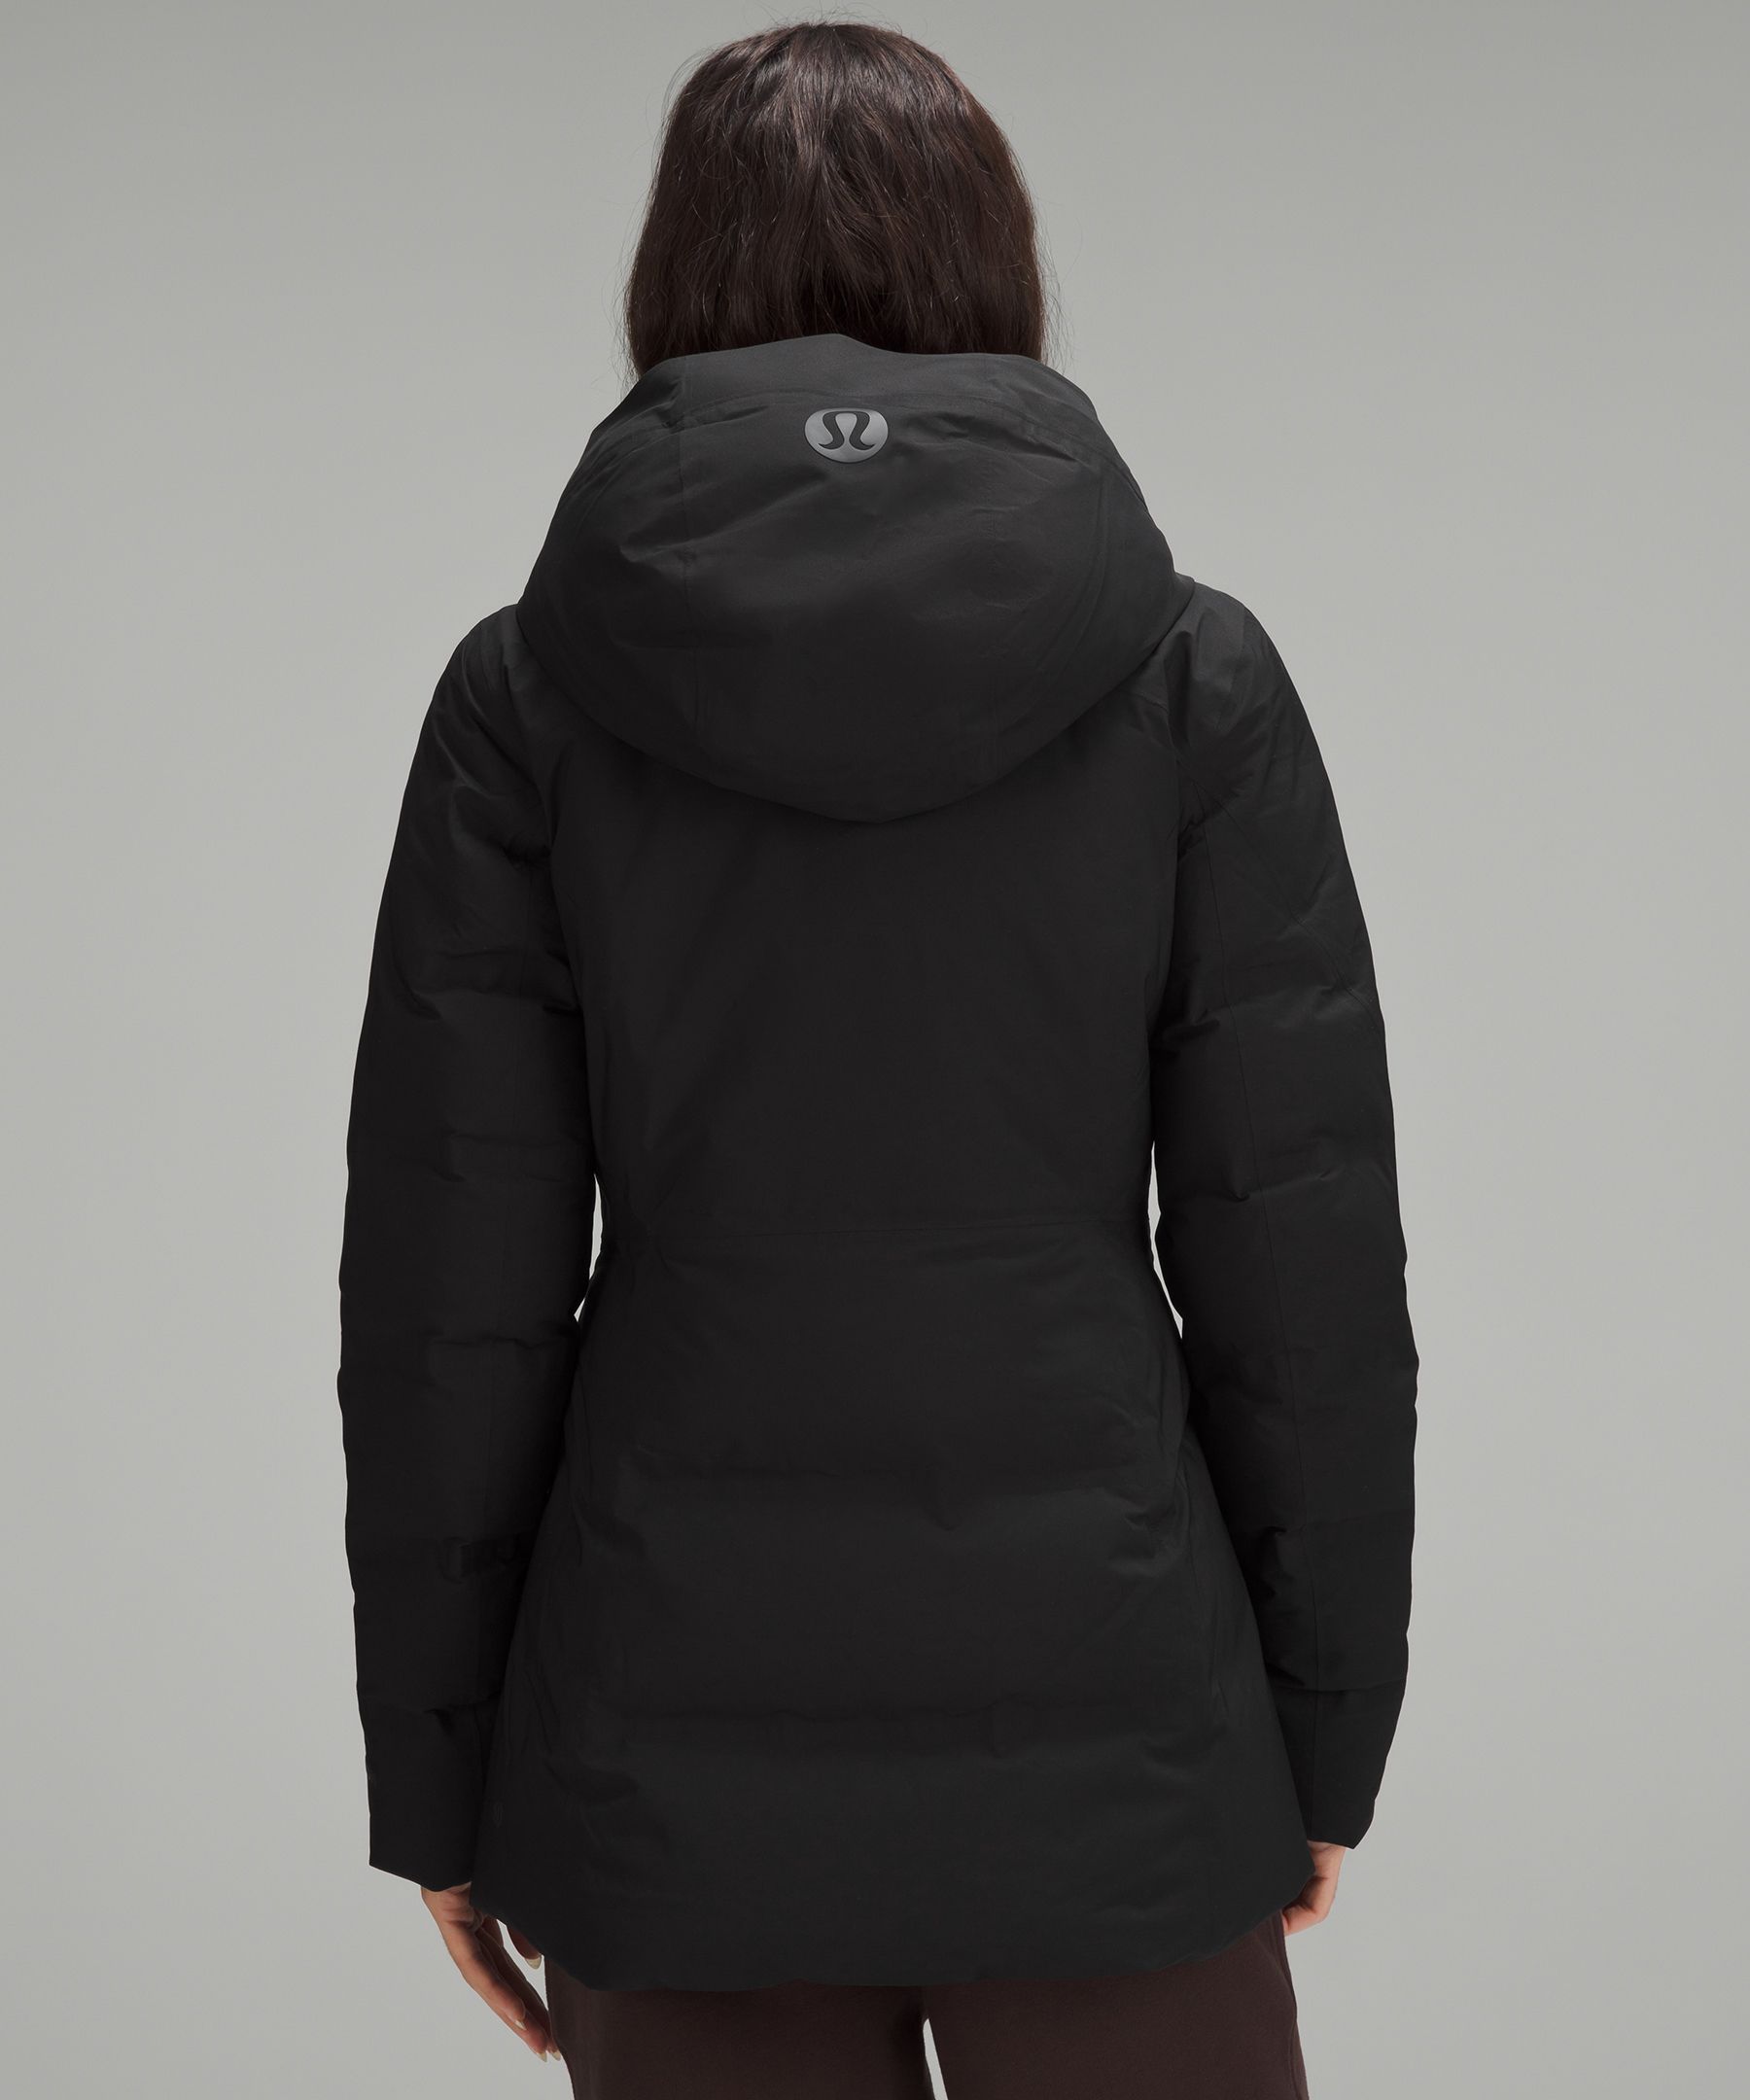 Stretchseal Sleet Street Jacket review on a mid sized body : r/lululemon